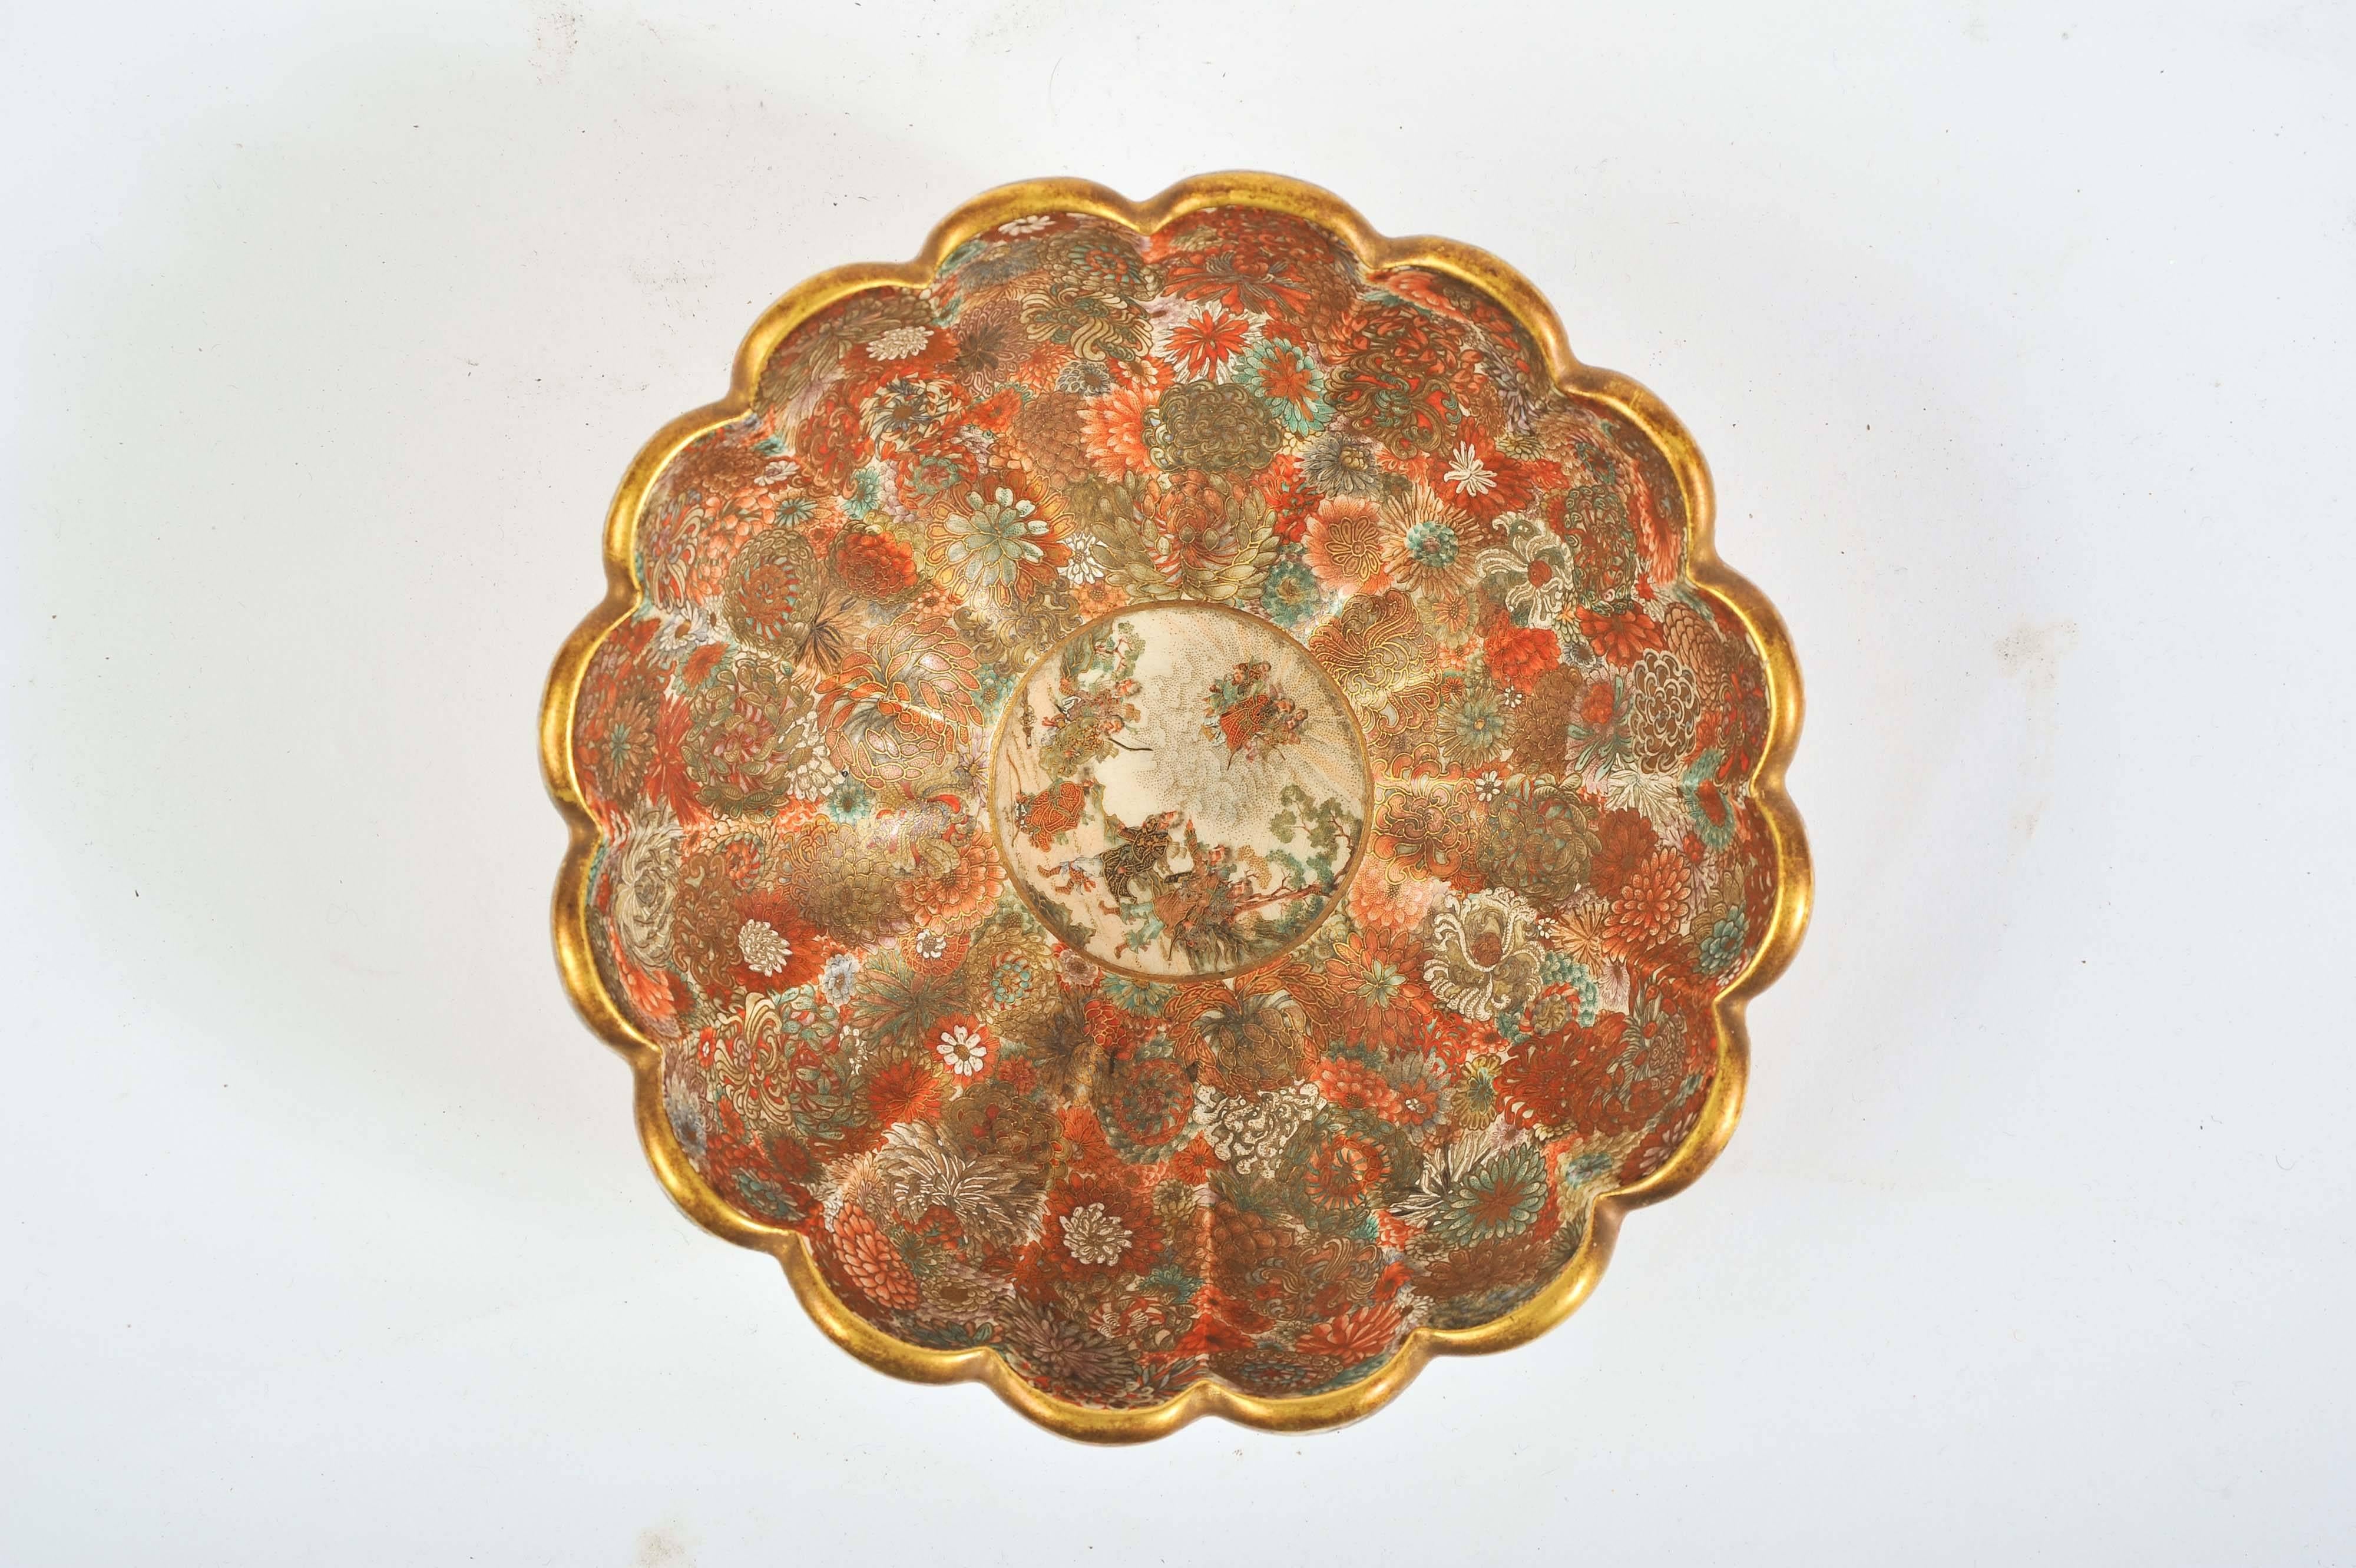 A fine quality 19th century Japanese Meiji period (1868-1912) Satsuma scalloped shape bowl. Having wonderful bold flower decoration inside and out and a classical Japanese scene to the centre depicting warriors looking up to the Gods.